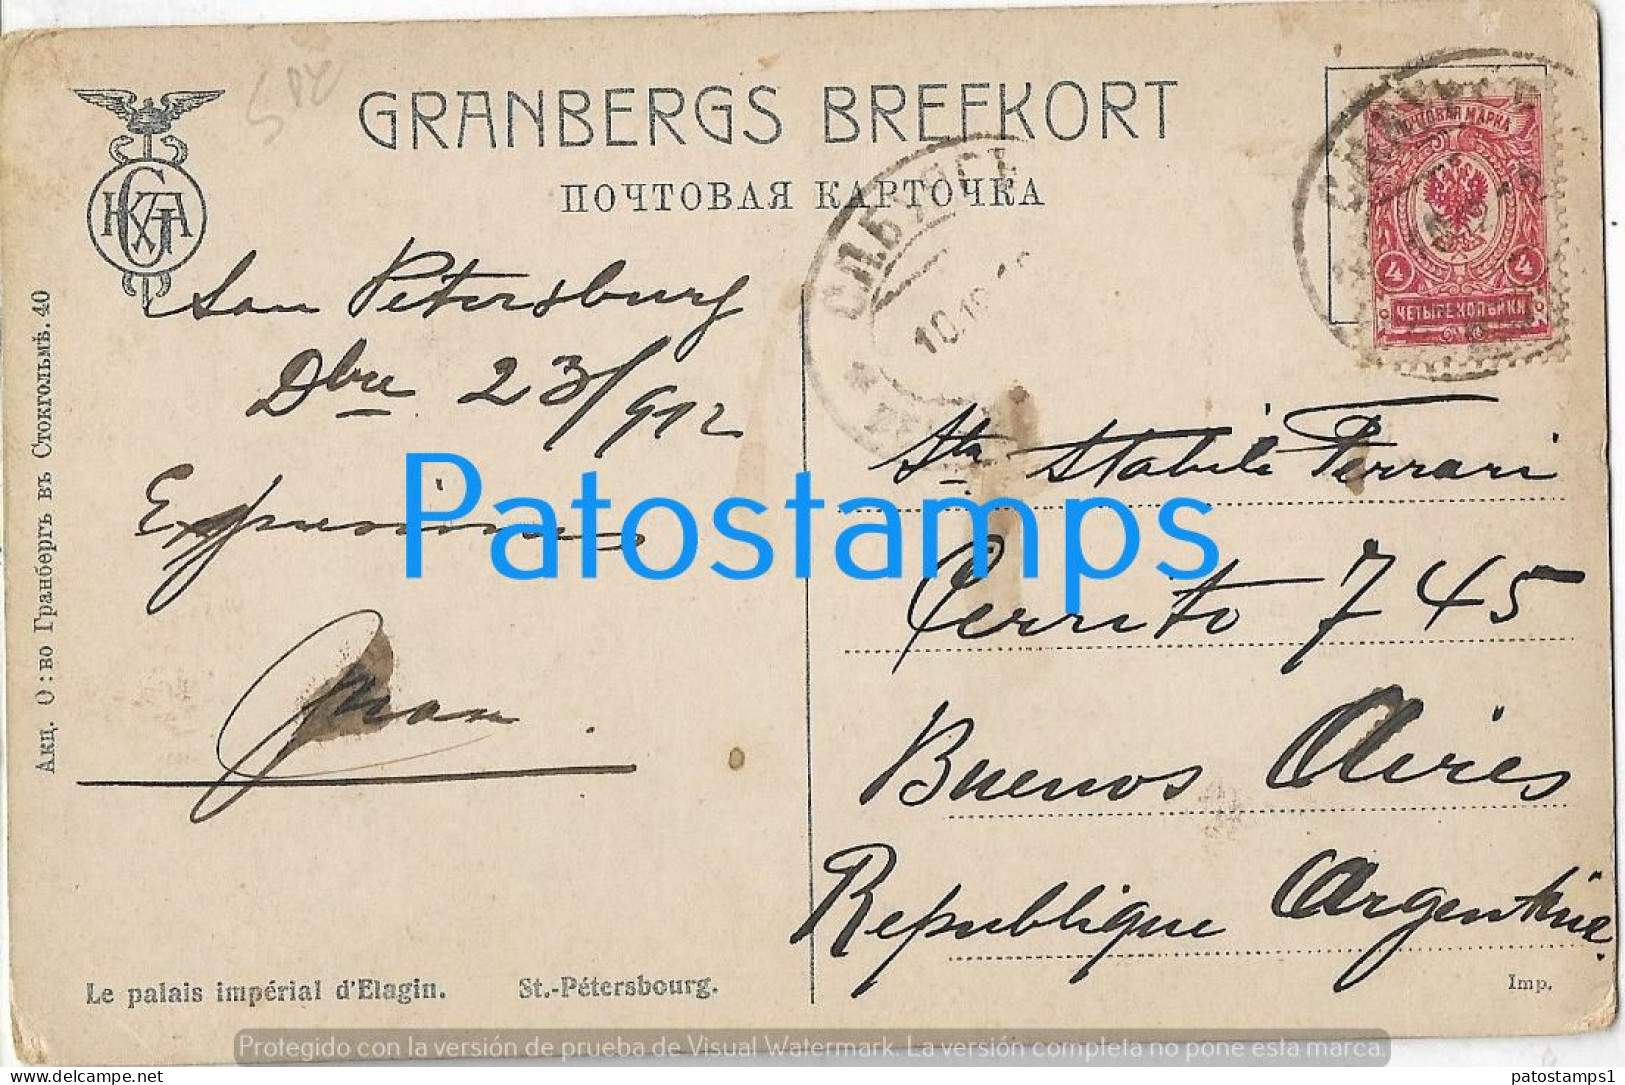 227637 RUSSIA ST PETERSBURG VIEW PARTIAL CIRCULATED TO ARGENTINA POSTAL POSTCARD - Rusland